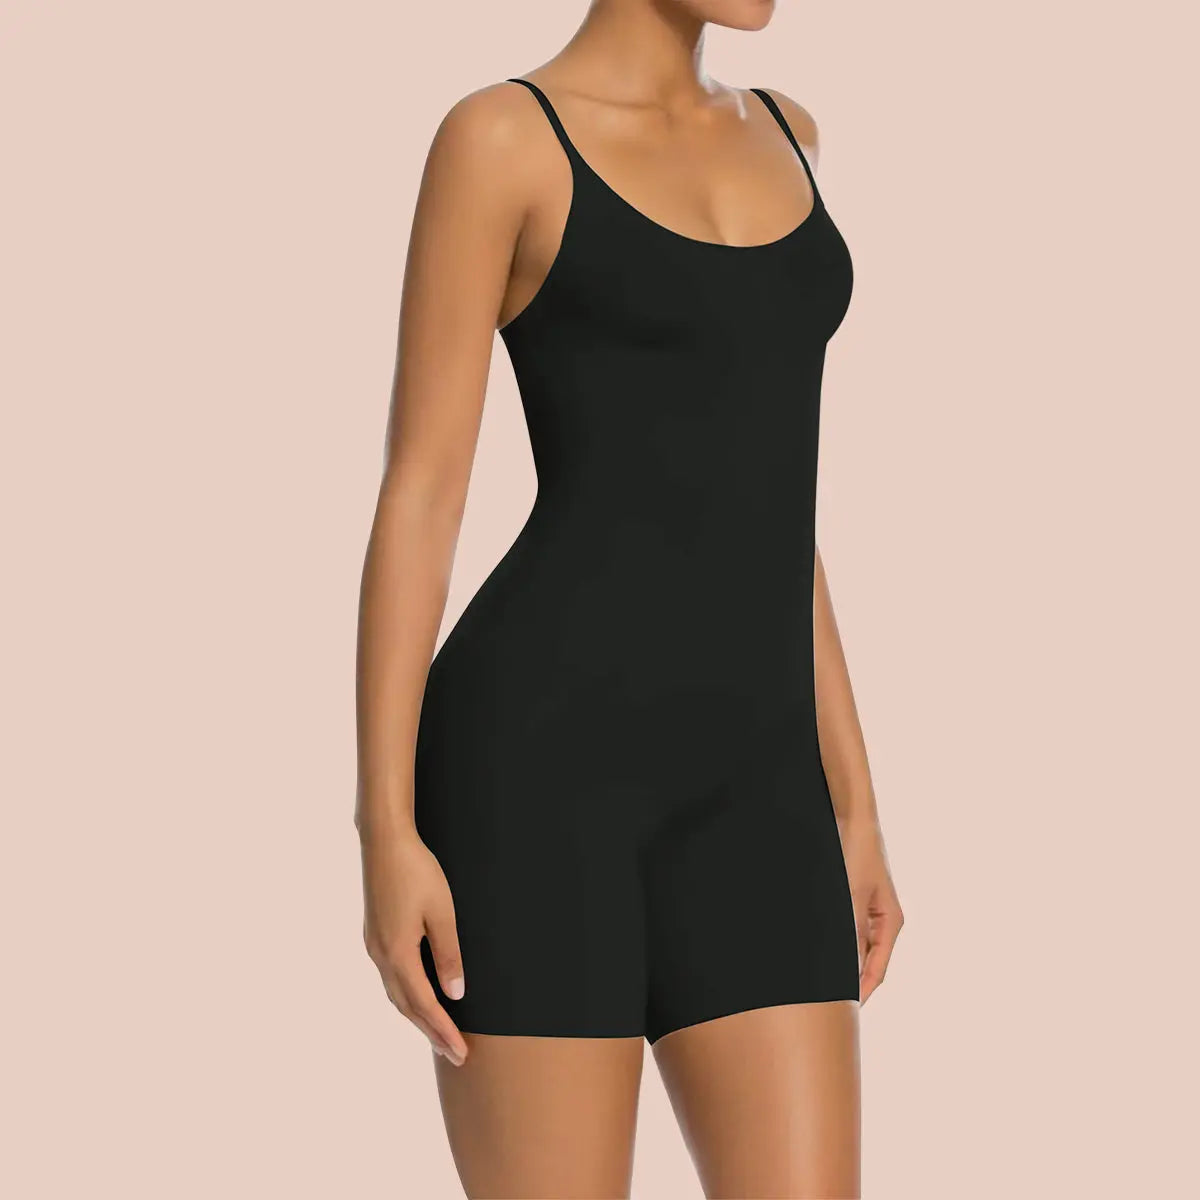 ▷ Instant Shaping Black/White Lace Front Body Shaper All in One Girdle  Shapewear - CENTRO COMERCIAL CASTELLANA 200 ◁